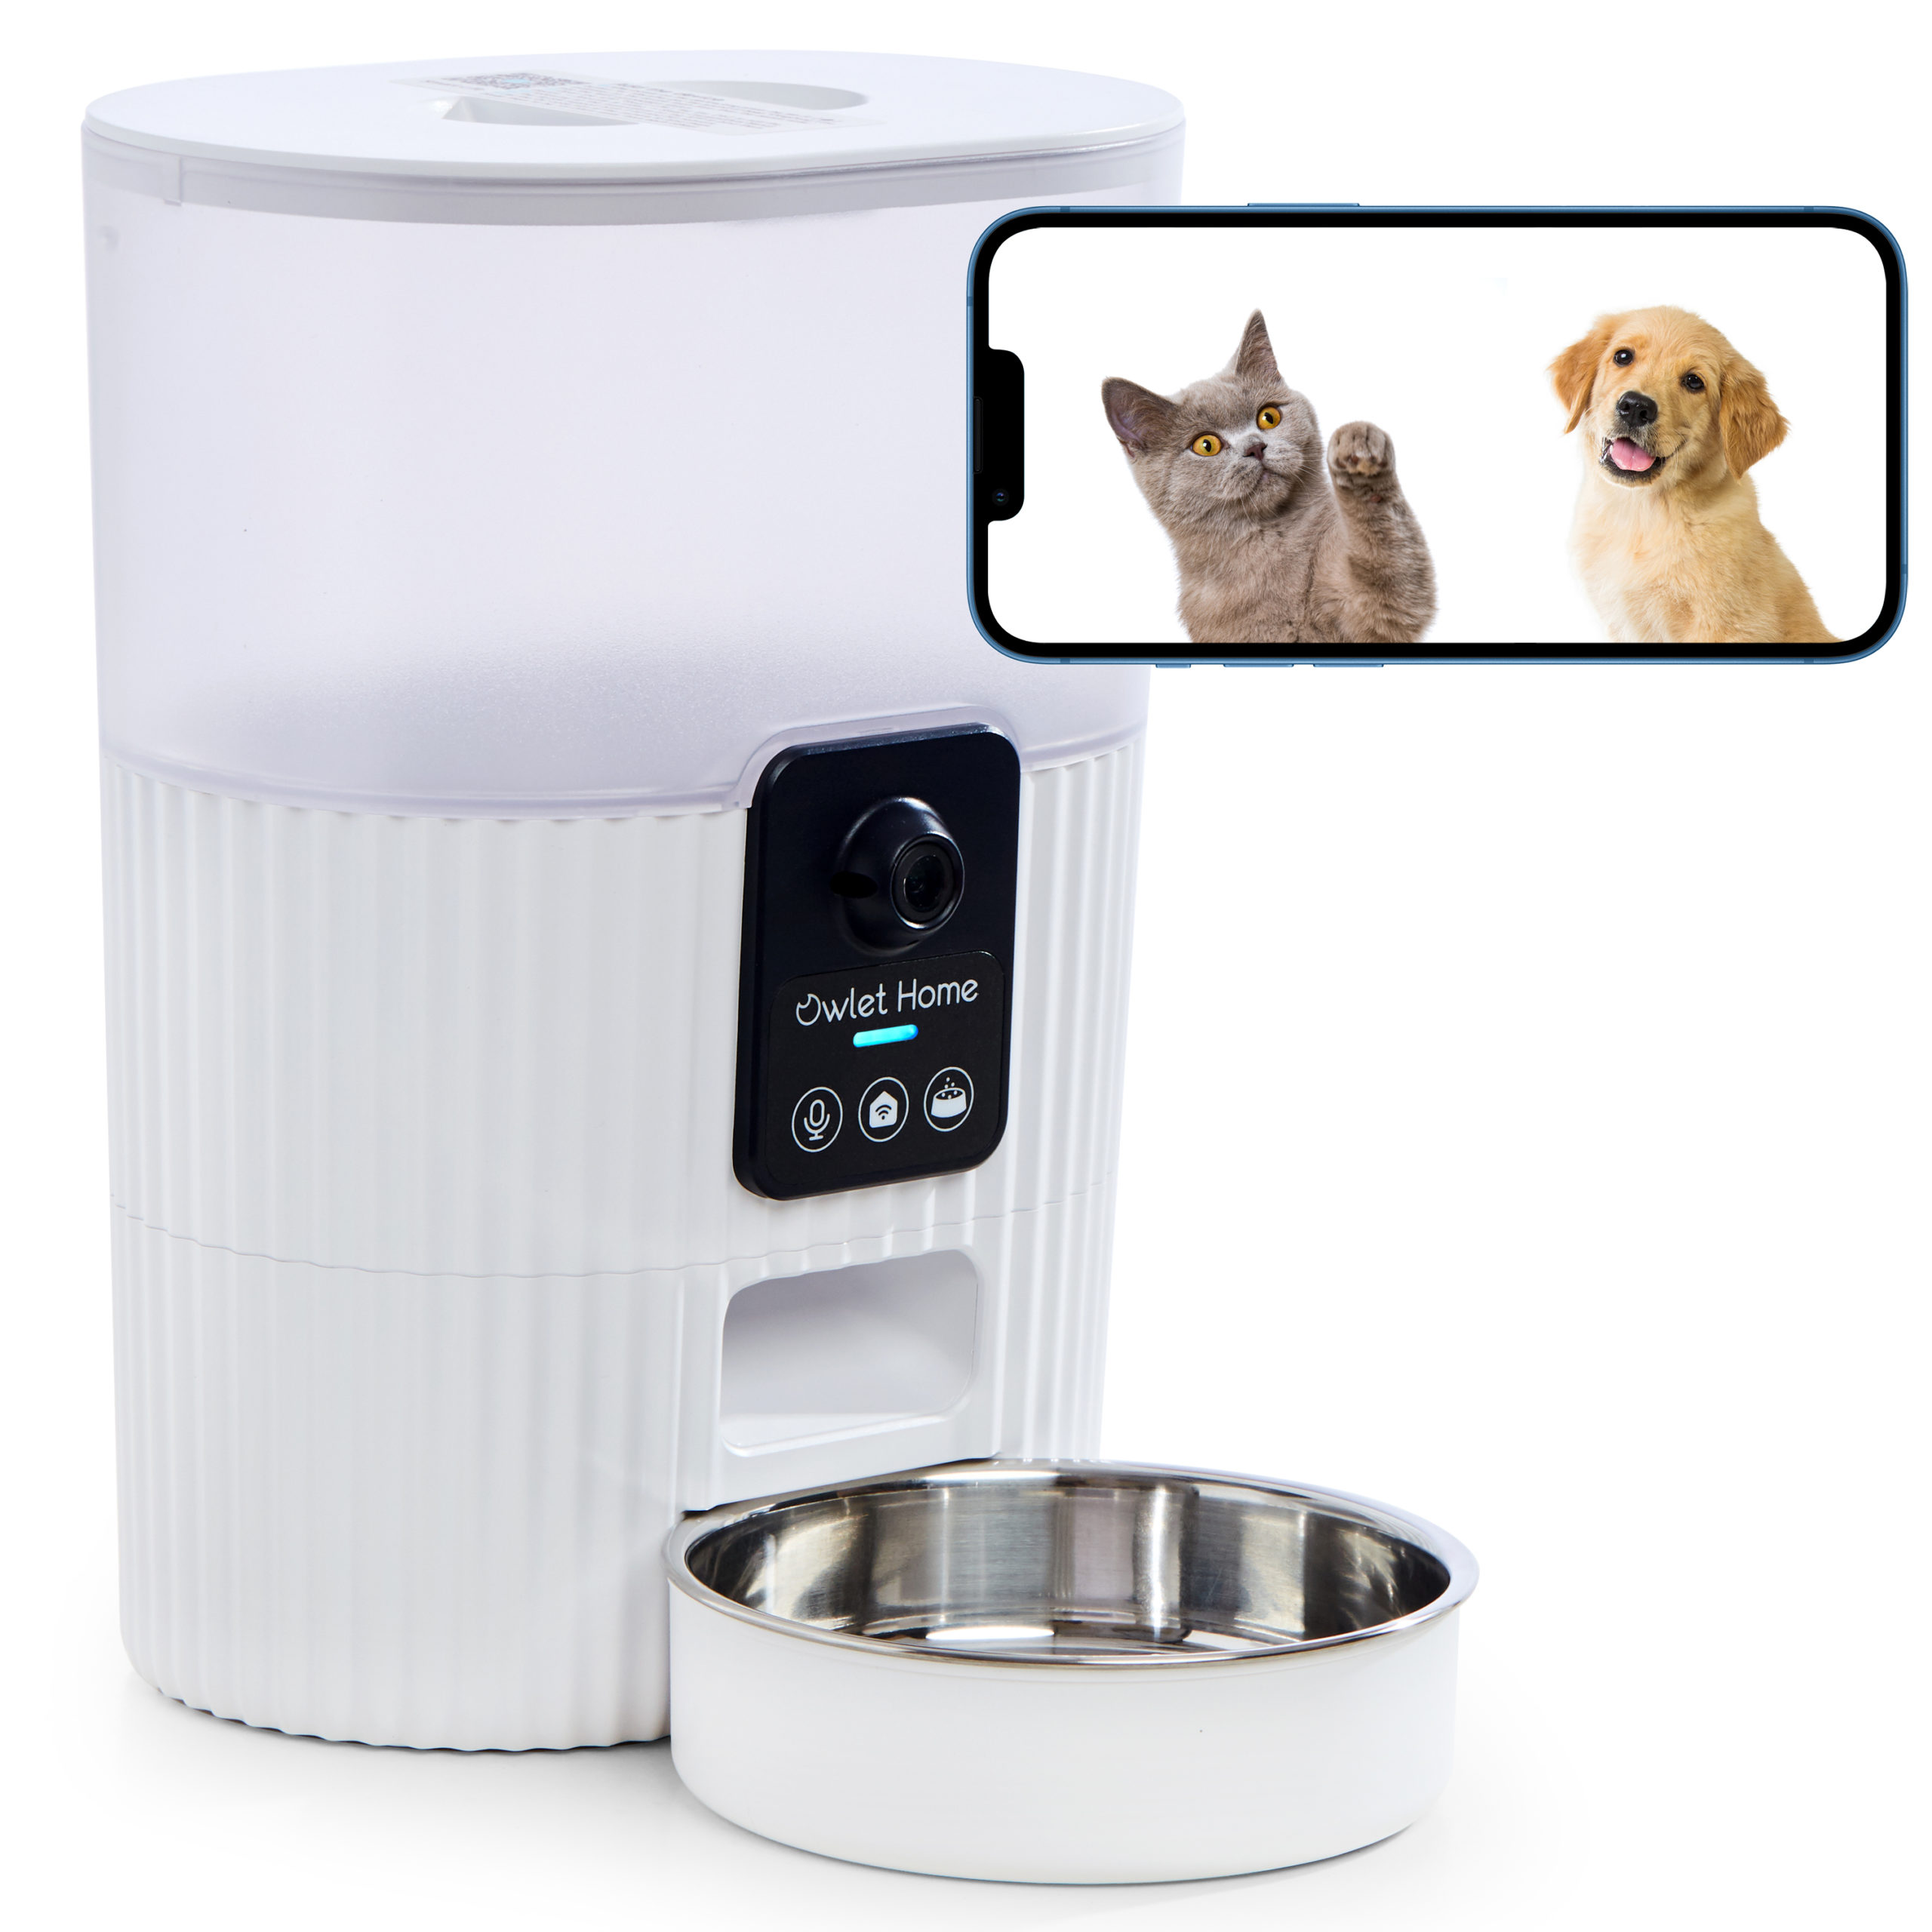 Owlet Home Smart Automatic Pet Feeder with 1080P HD Camera for